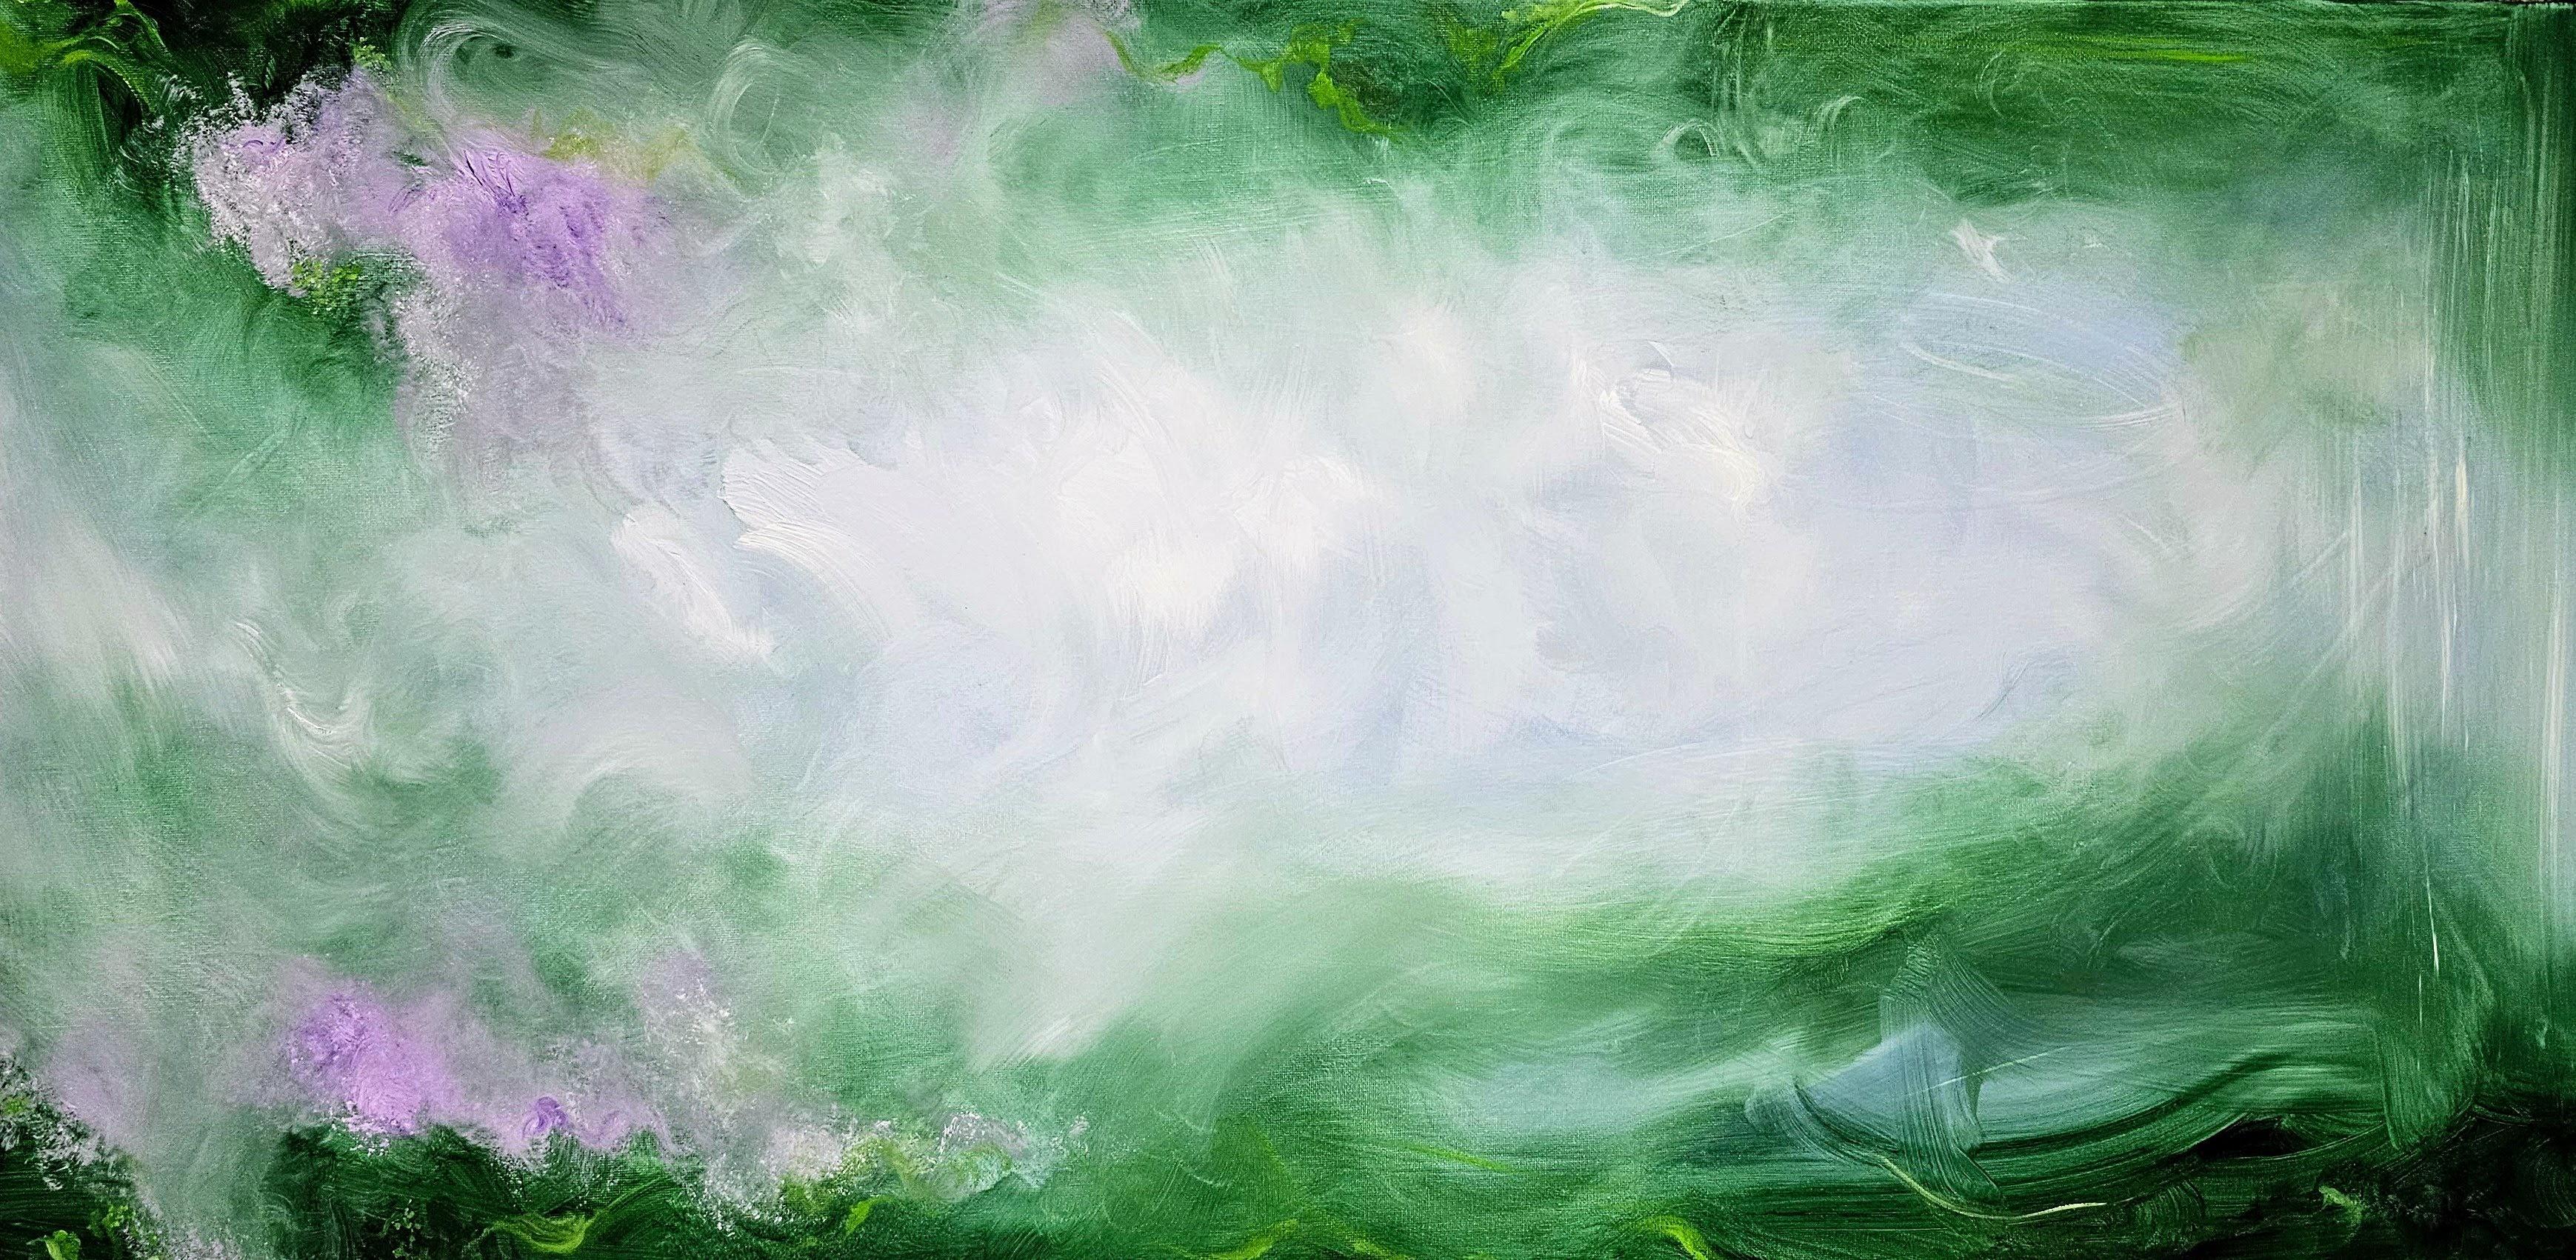 Summer solstice - Vibrant green abstract nature painting For Sale 3